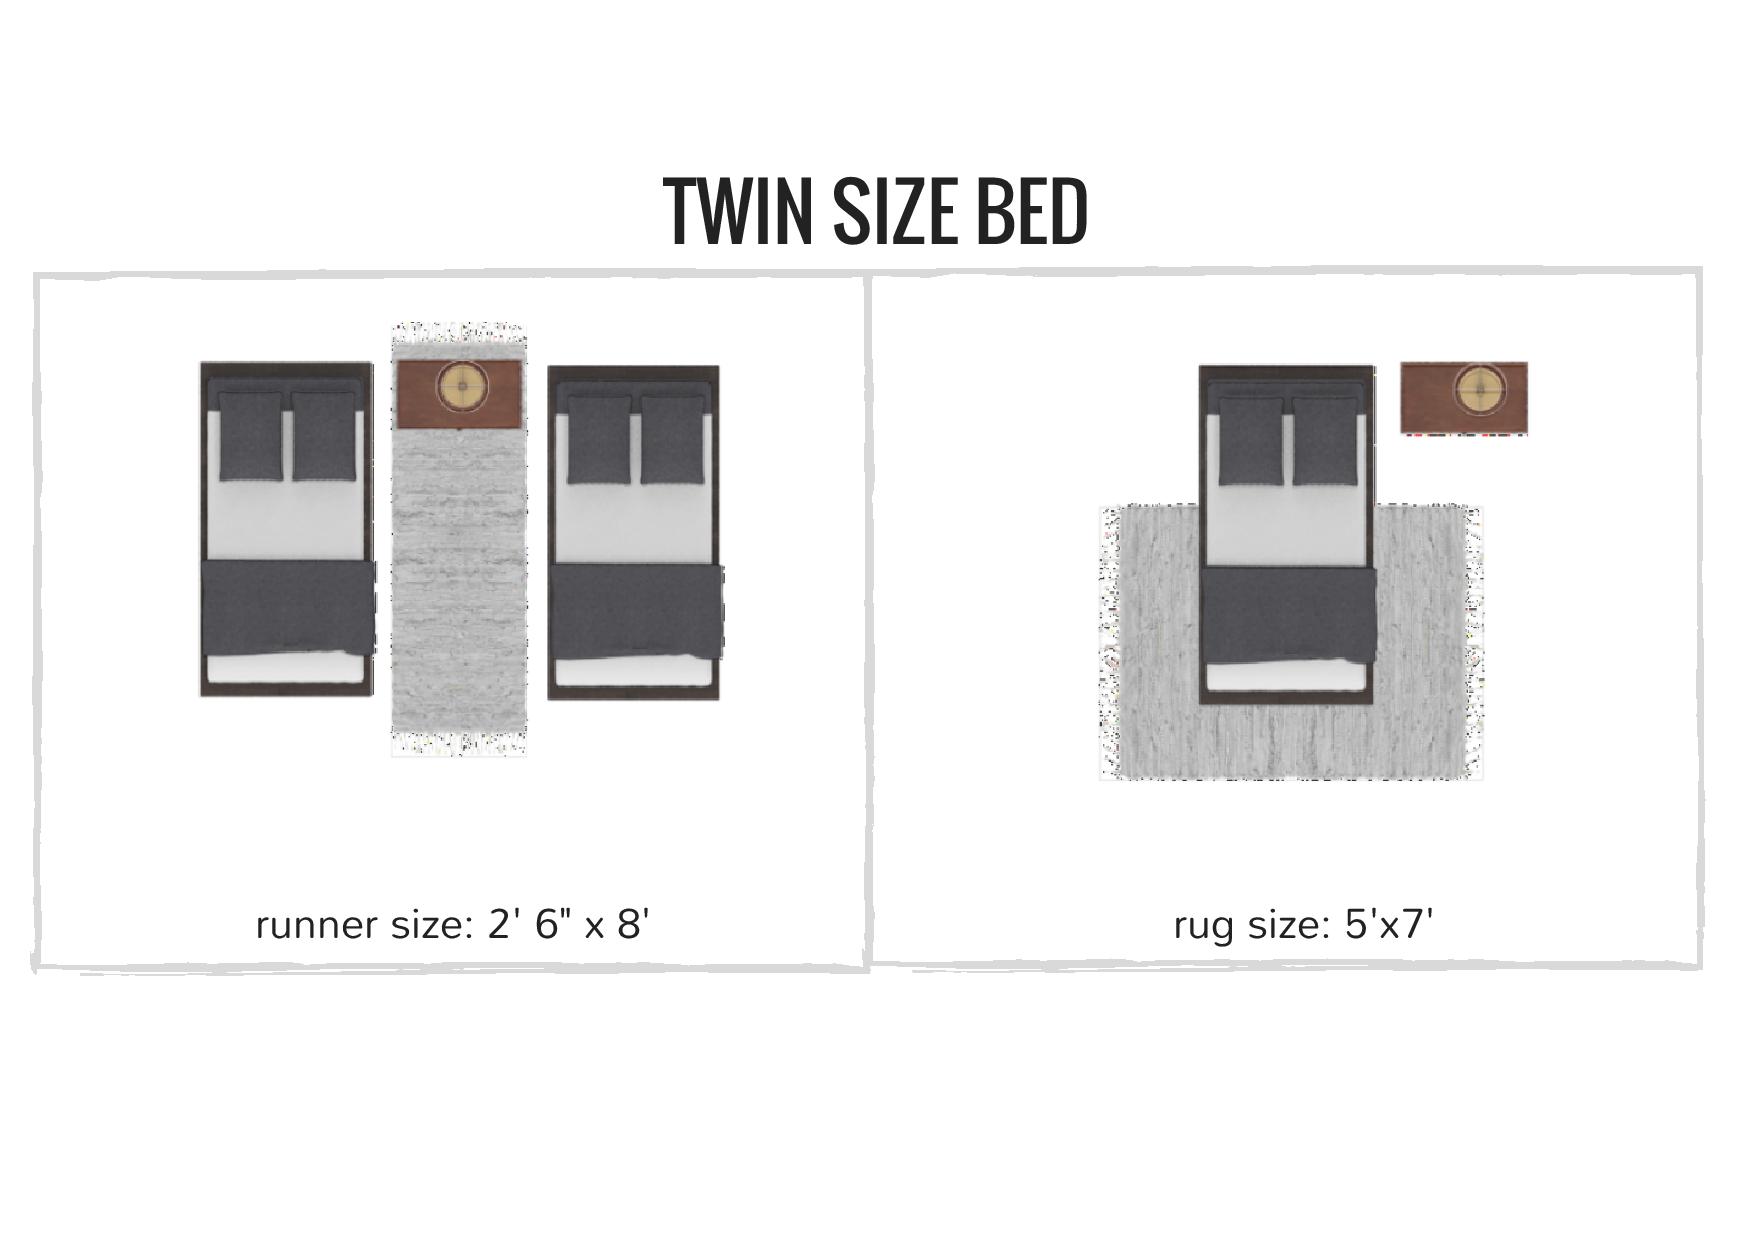 rug sizing and placement guide - what size rug do you need for your twin size bed / bedroom